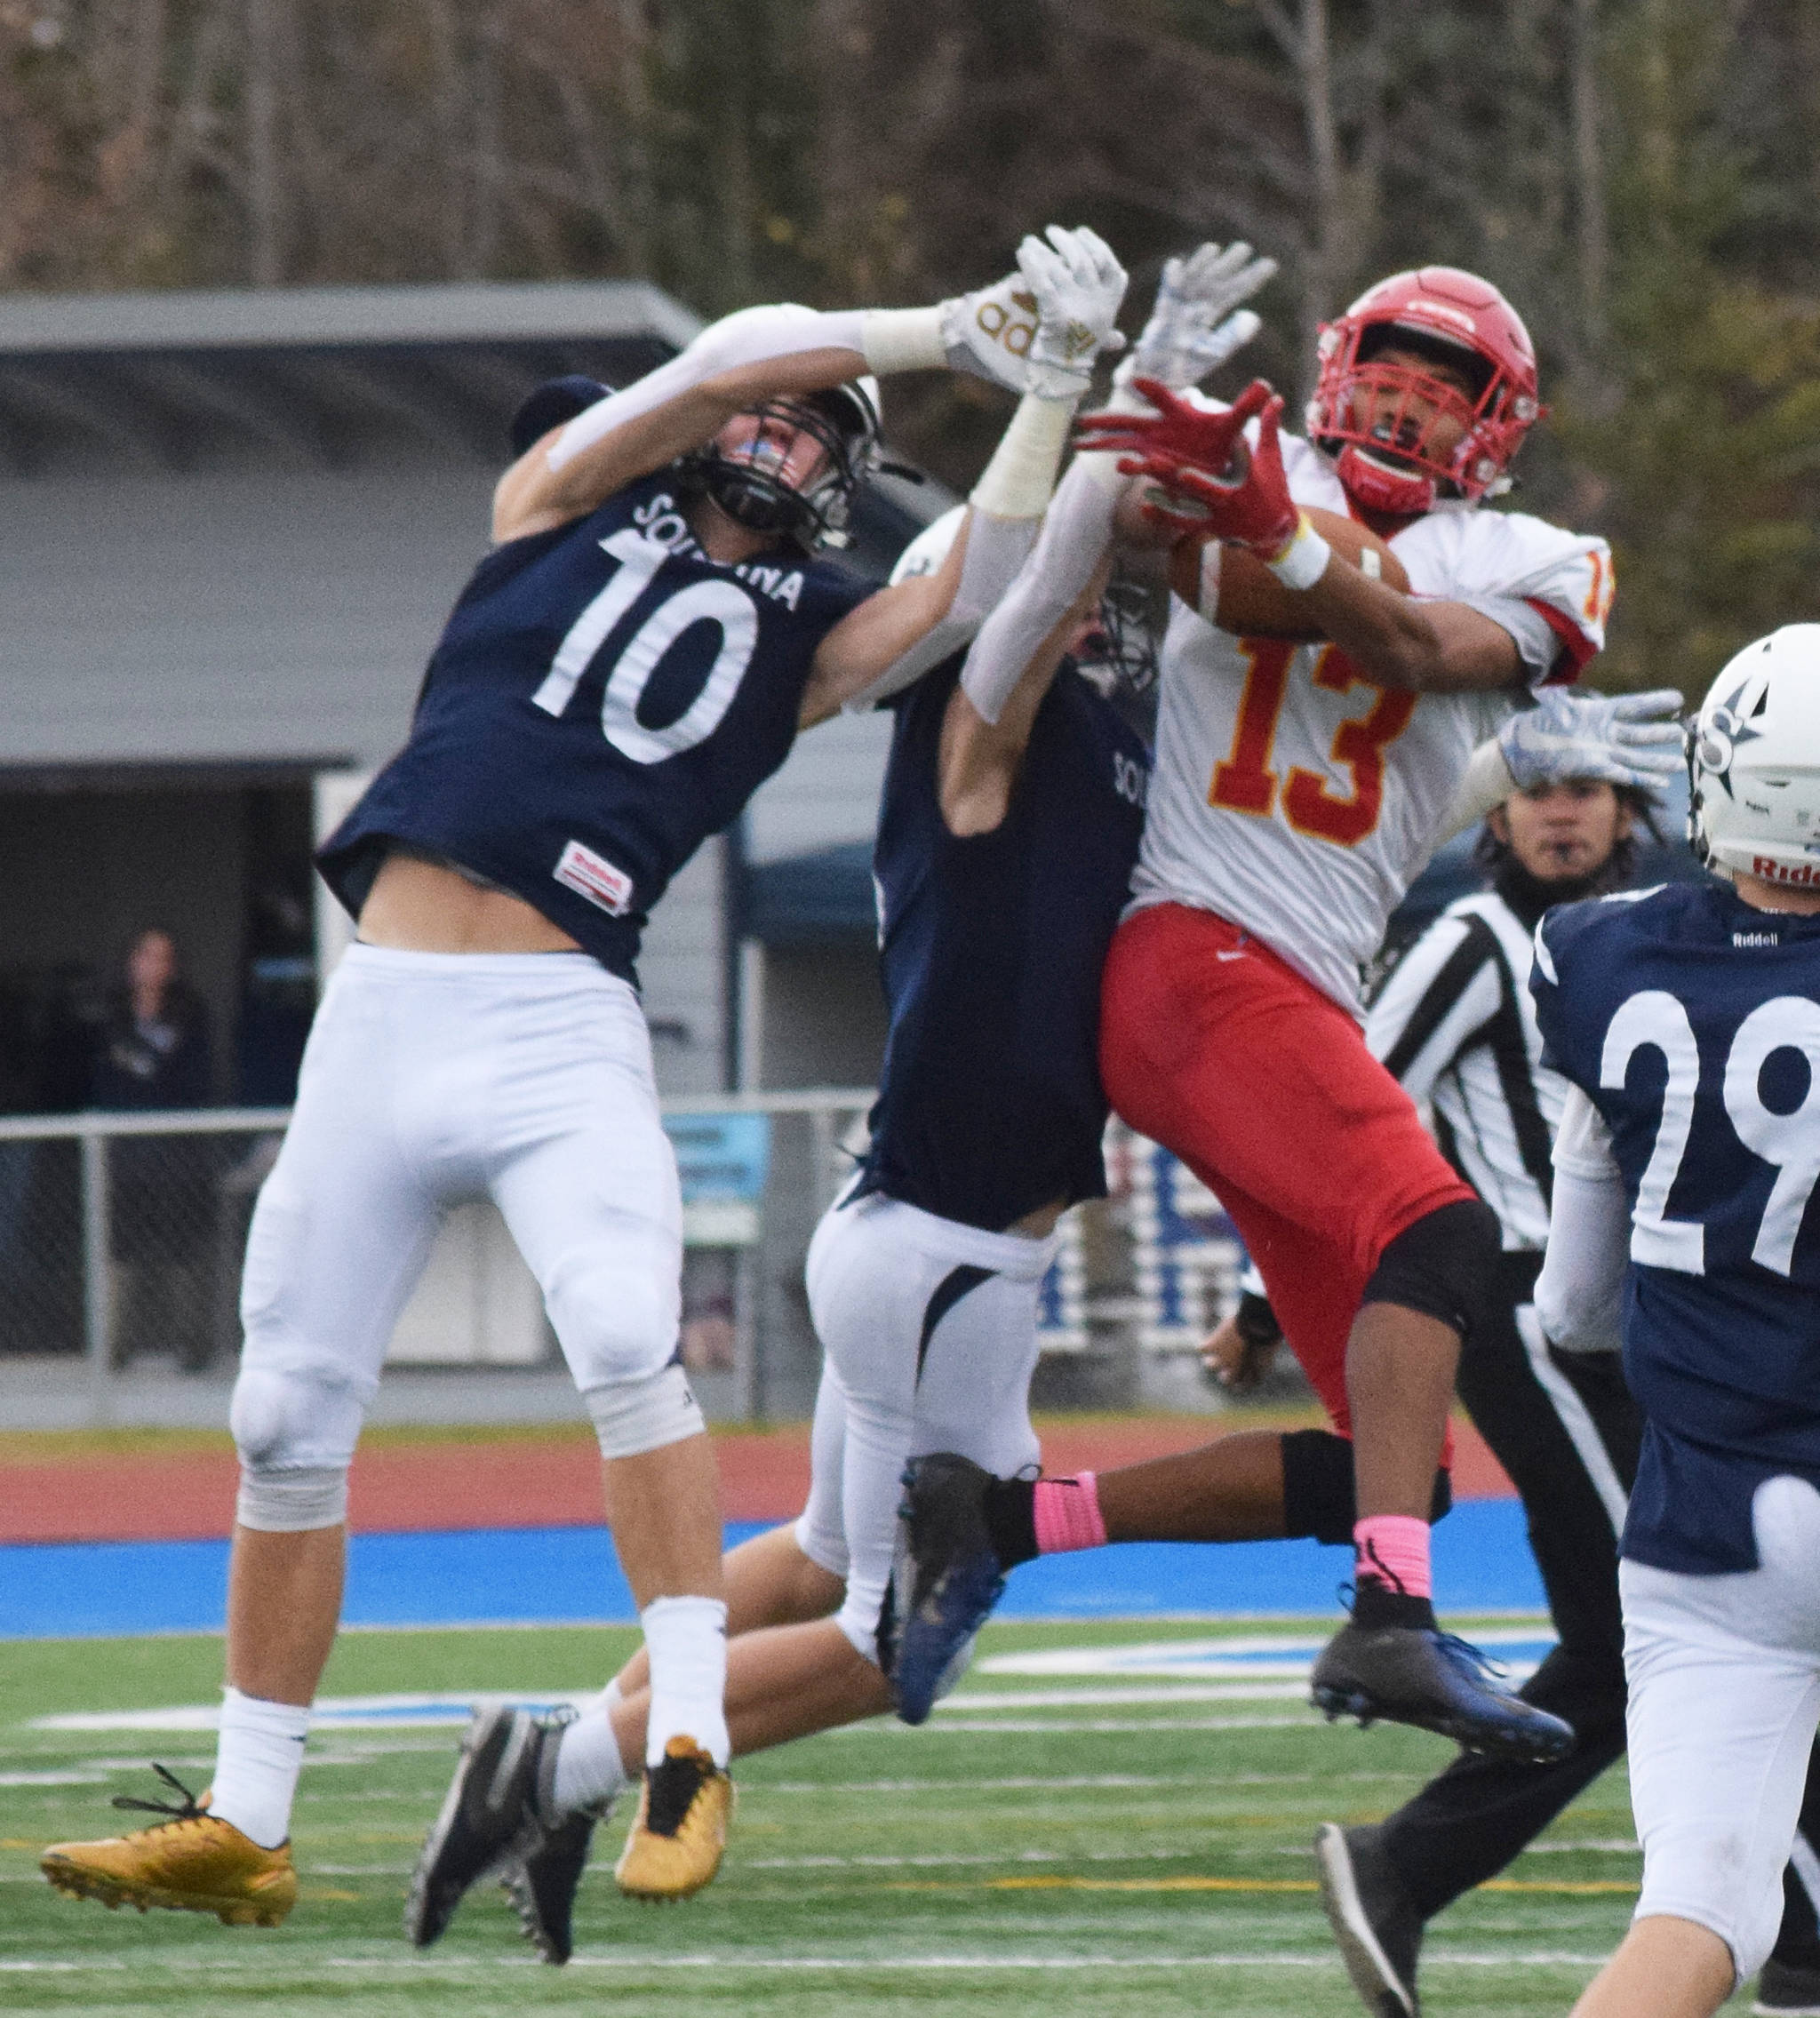 West Valley’s Tyriq Nance (13) hauls in a reception with Soldotna defenders Zach Hanson (10) and Jersey Truesdell defending in a Div. II state semifinal Friday, Oct. 11, 2019, in Soldotna, Alaska. (Photo by Joey Klecka/Peninsula Clarion)